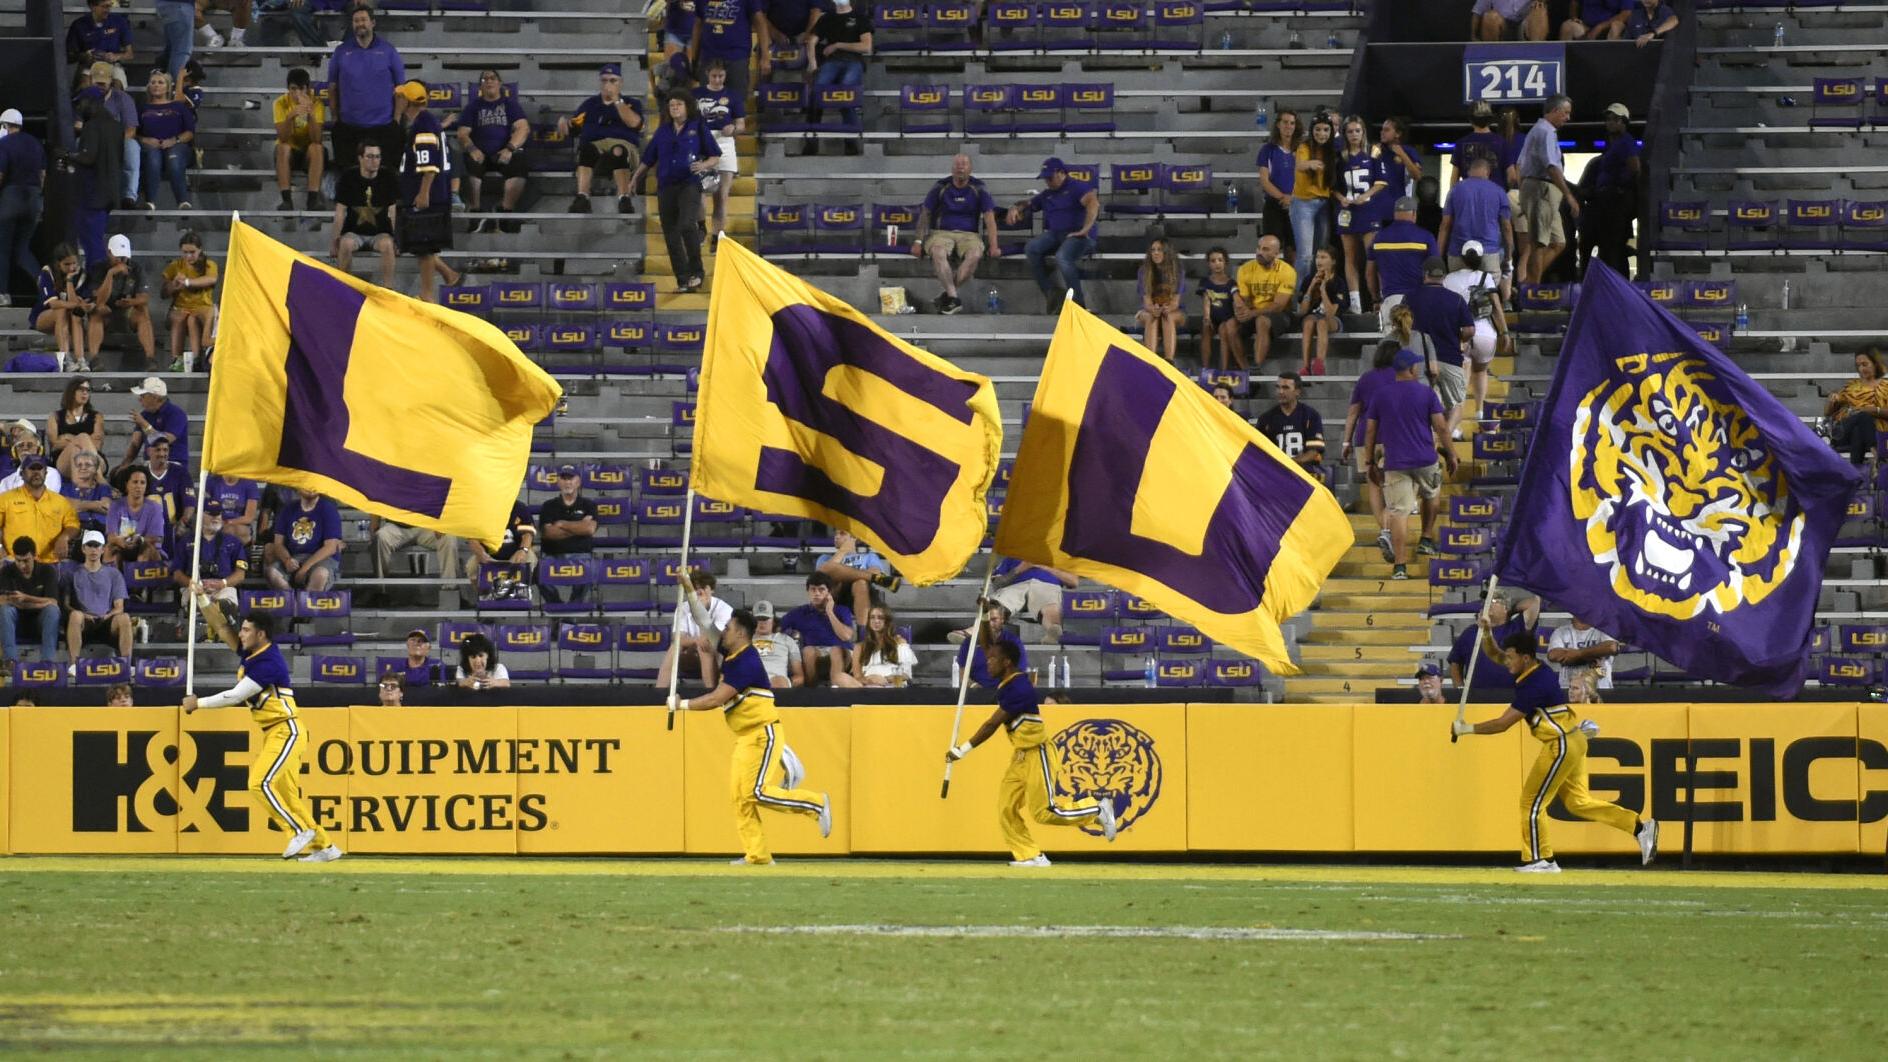 Lsu Football Schedule 2022 2023 Ready For 2022? Lsu Football Schedule Released; See The Tigers' Key Dates,  Opponents | Lsu | Theadvocate.com